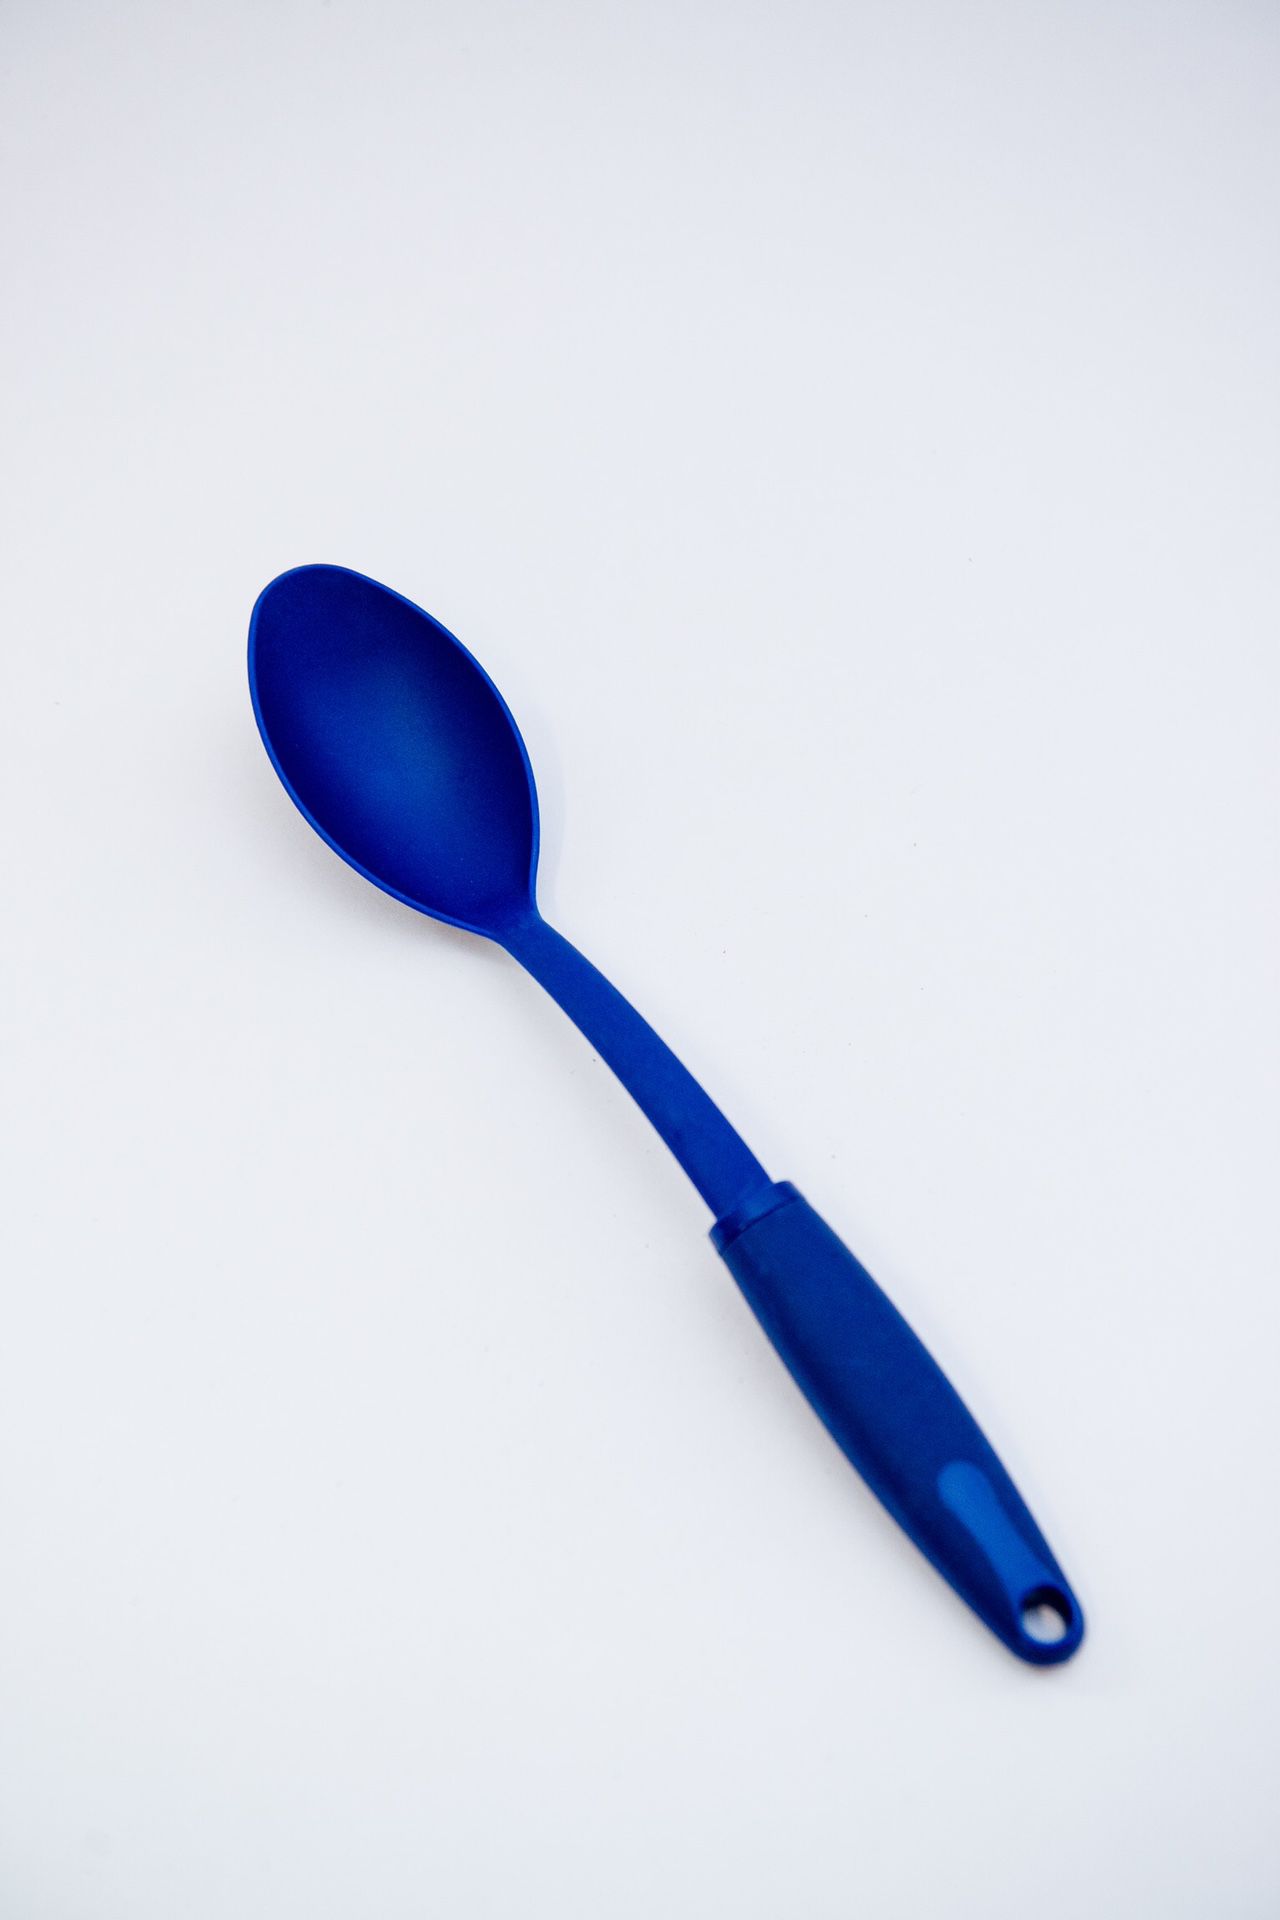 Inexpensive Blue Cooking Spoon